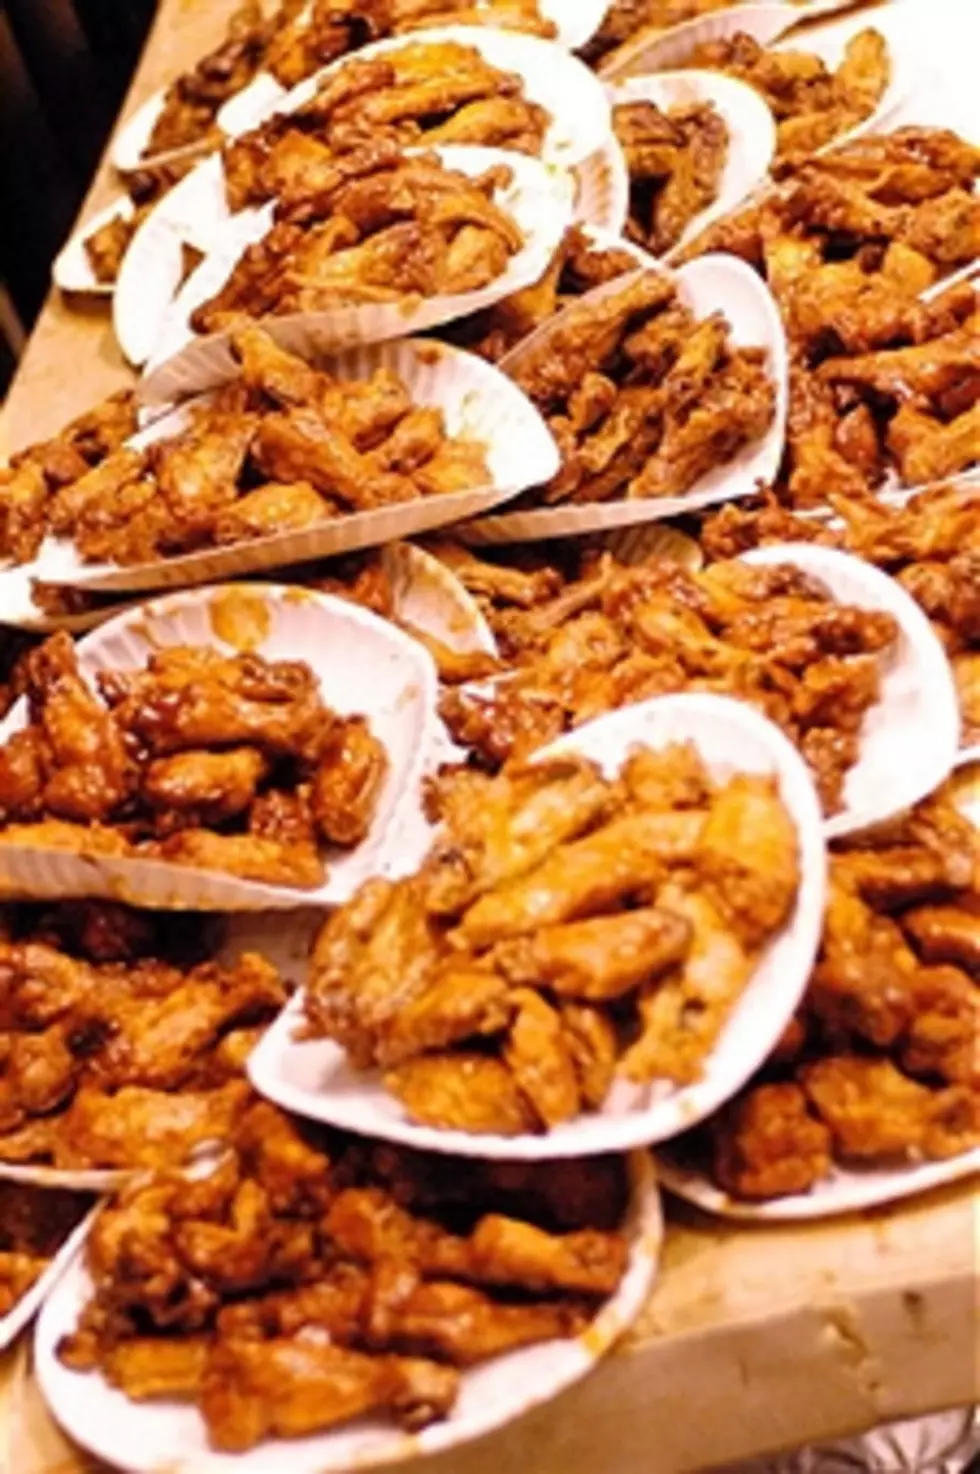 Wing Wars Is Coming to Mid Hudson Civic Center